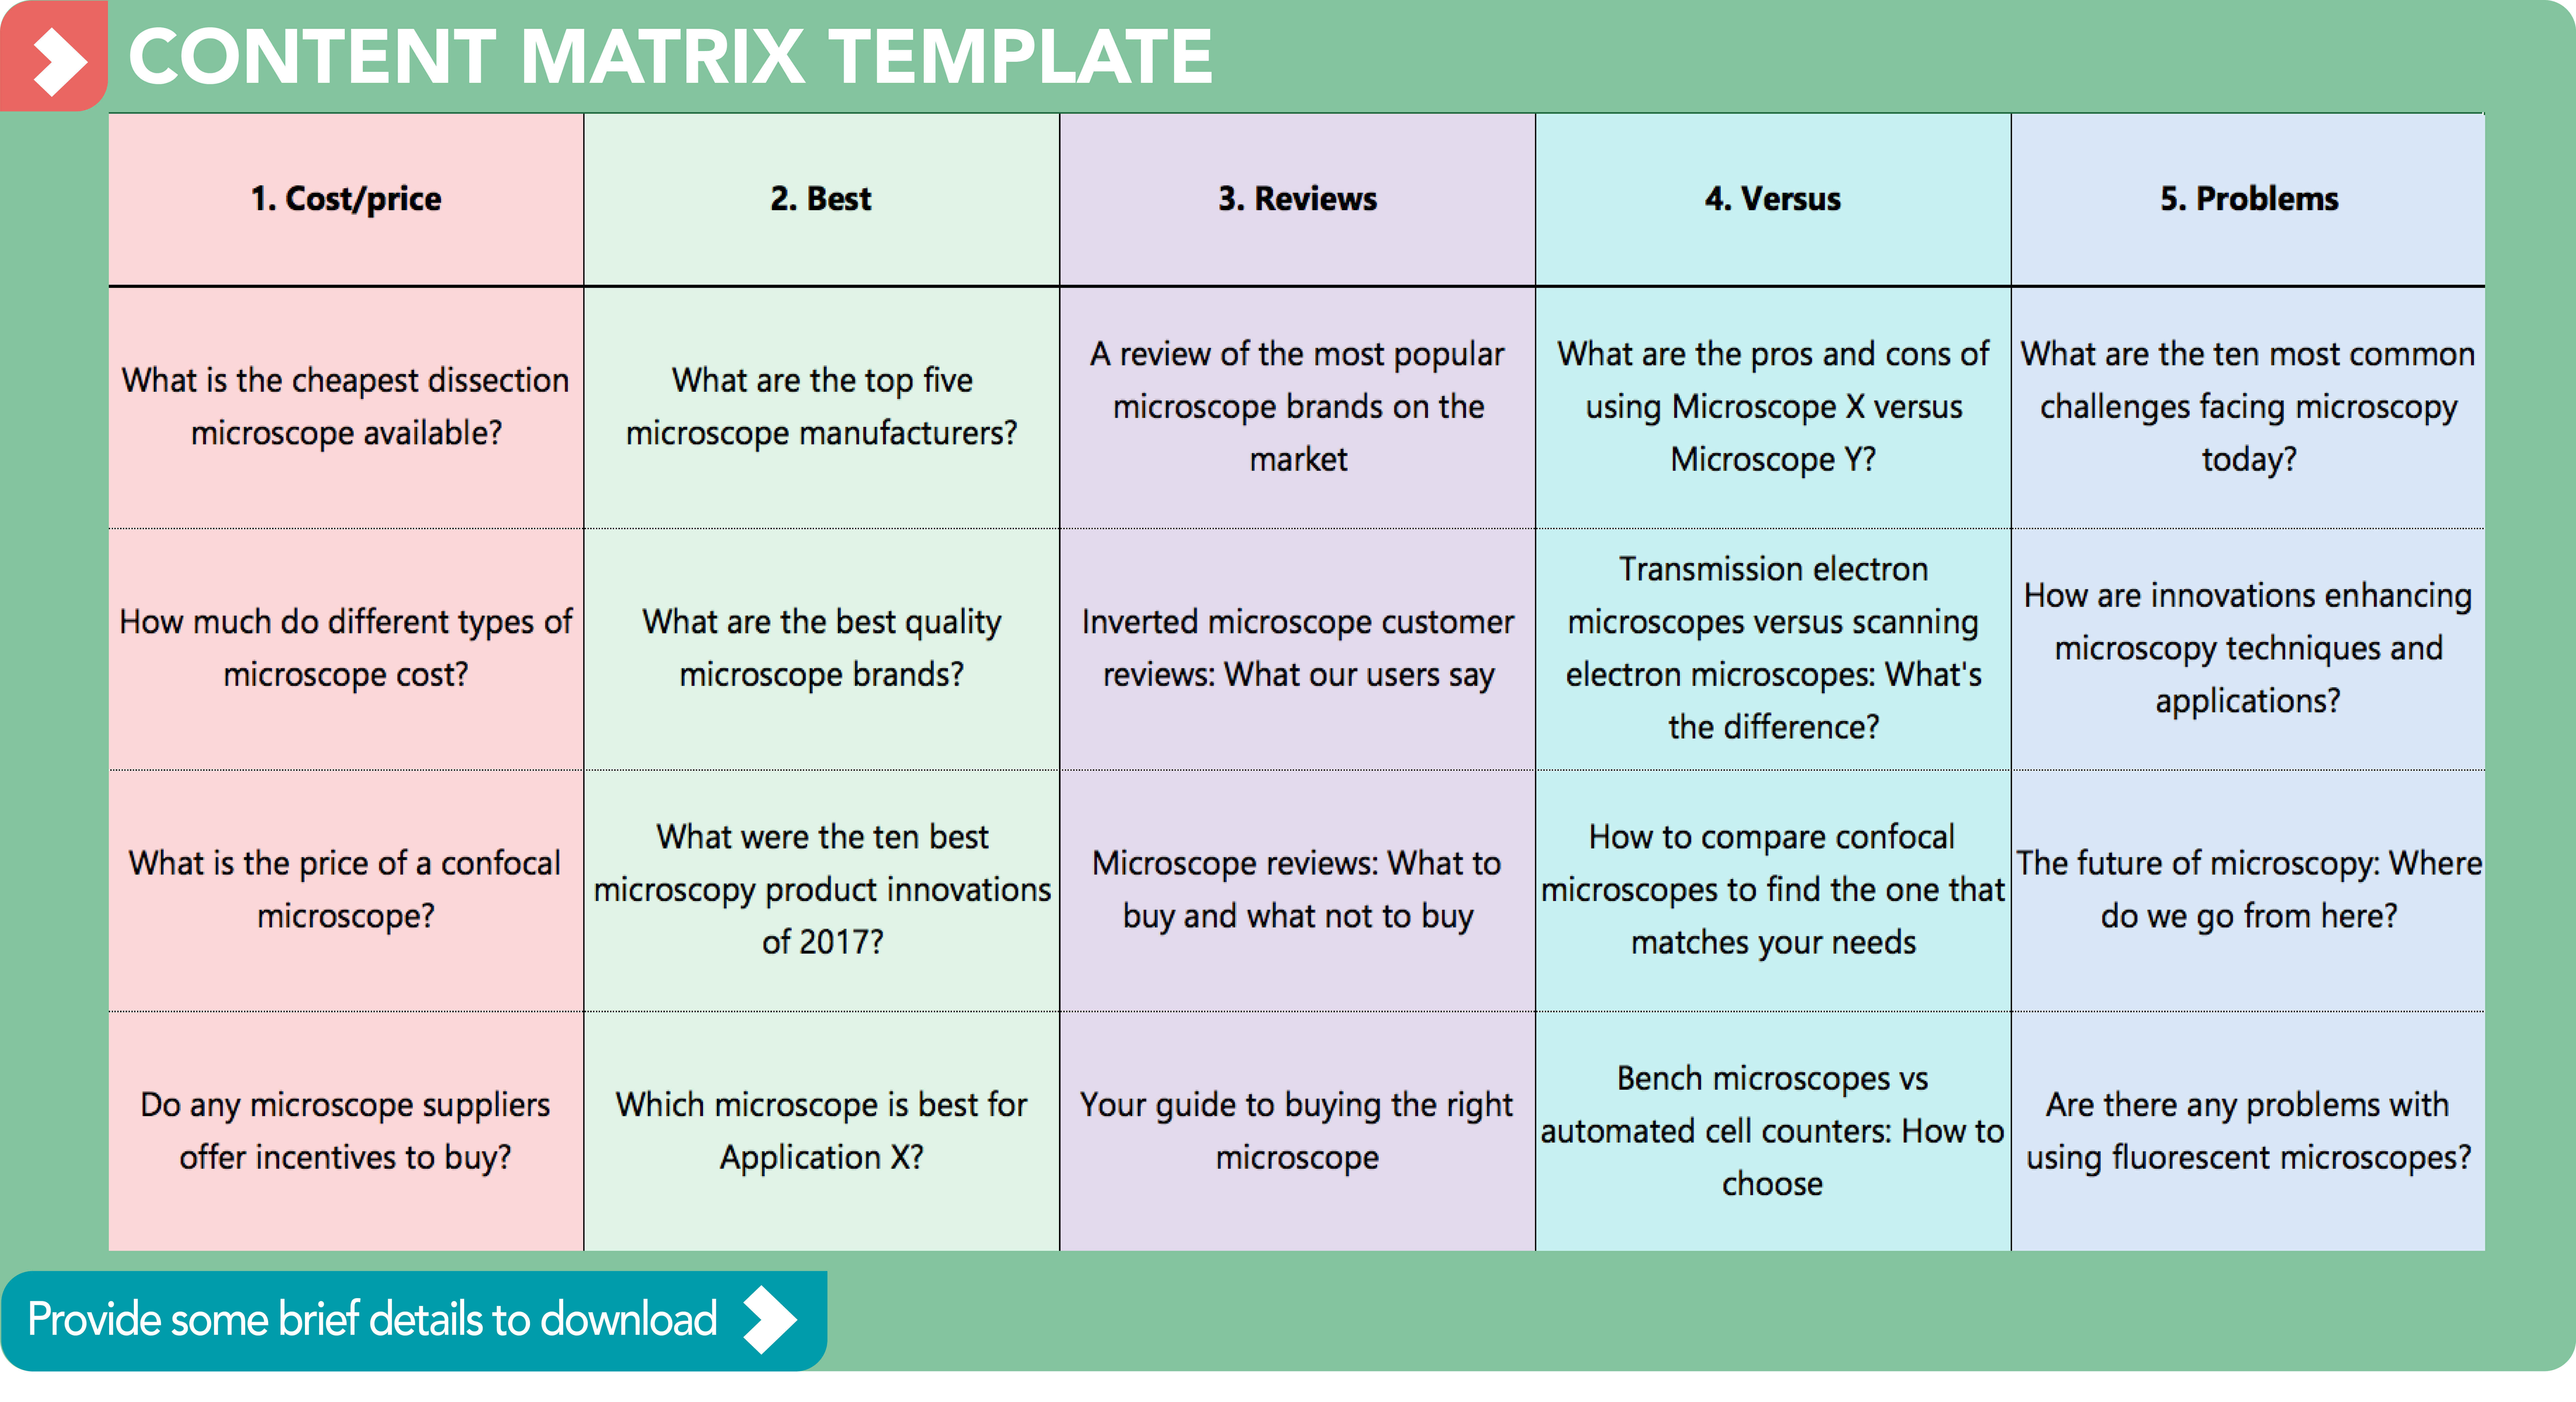 Get your free 'they ask, you answer' content brainstorm template